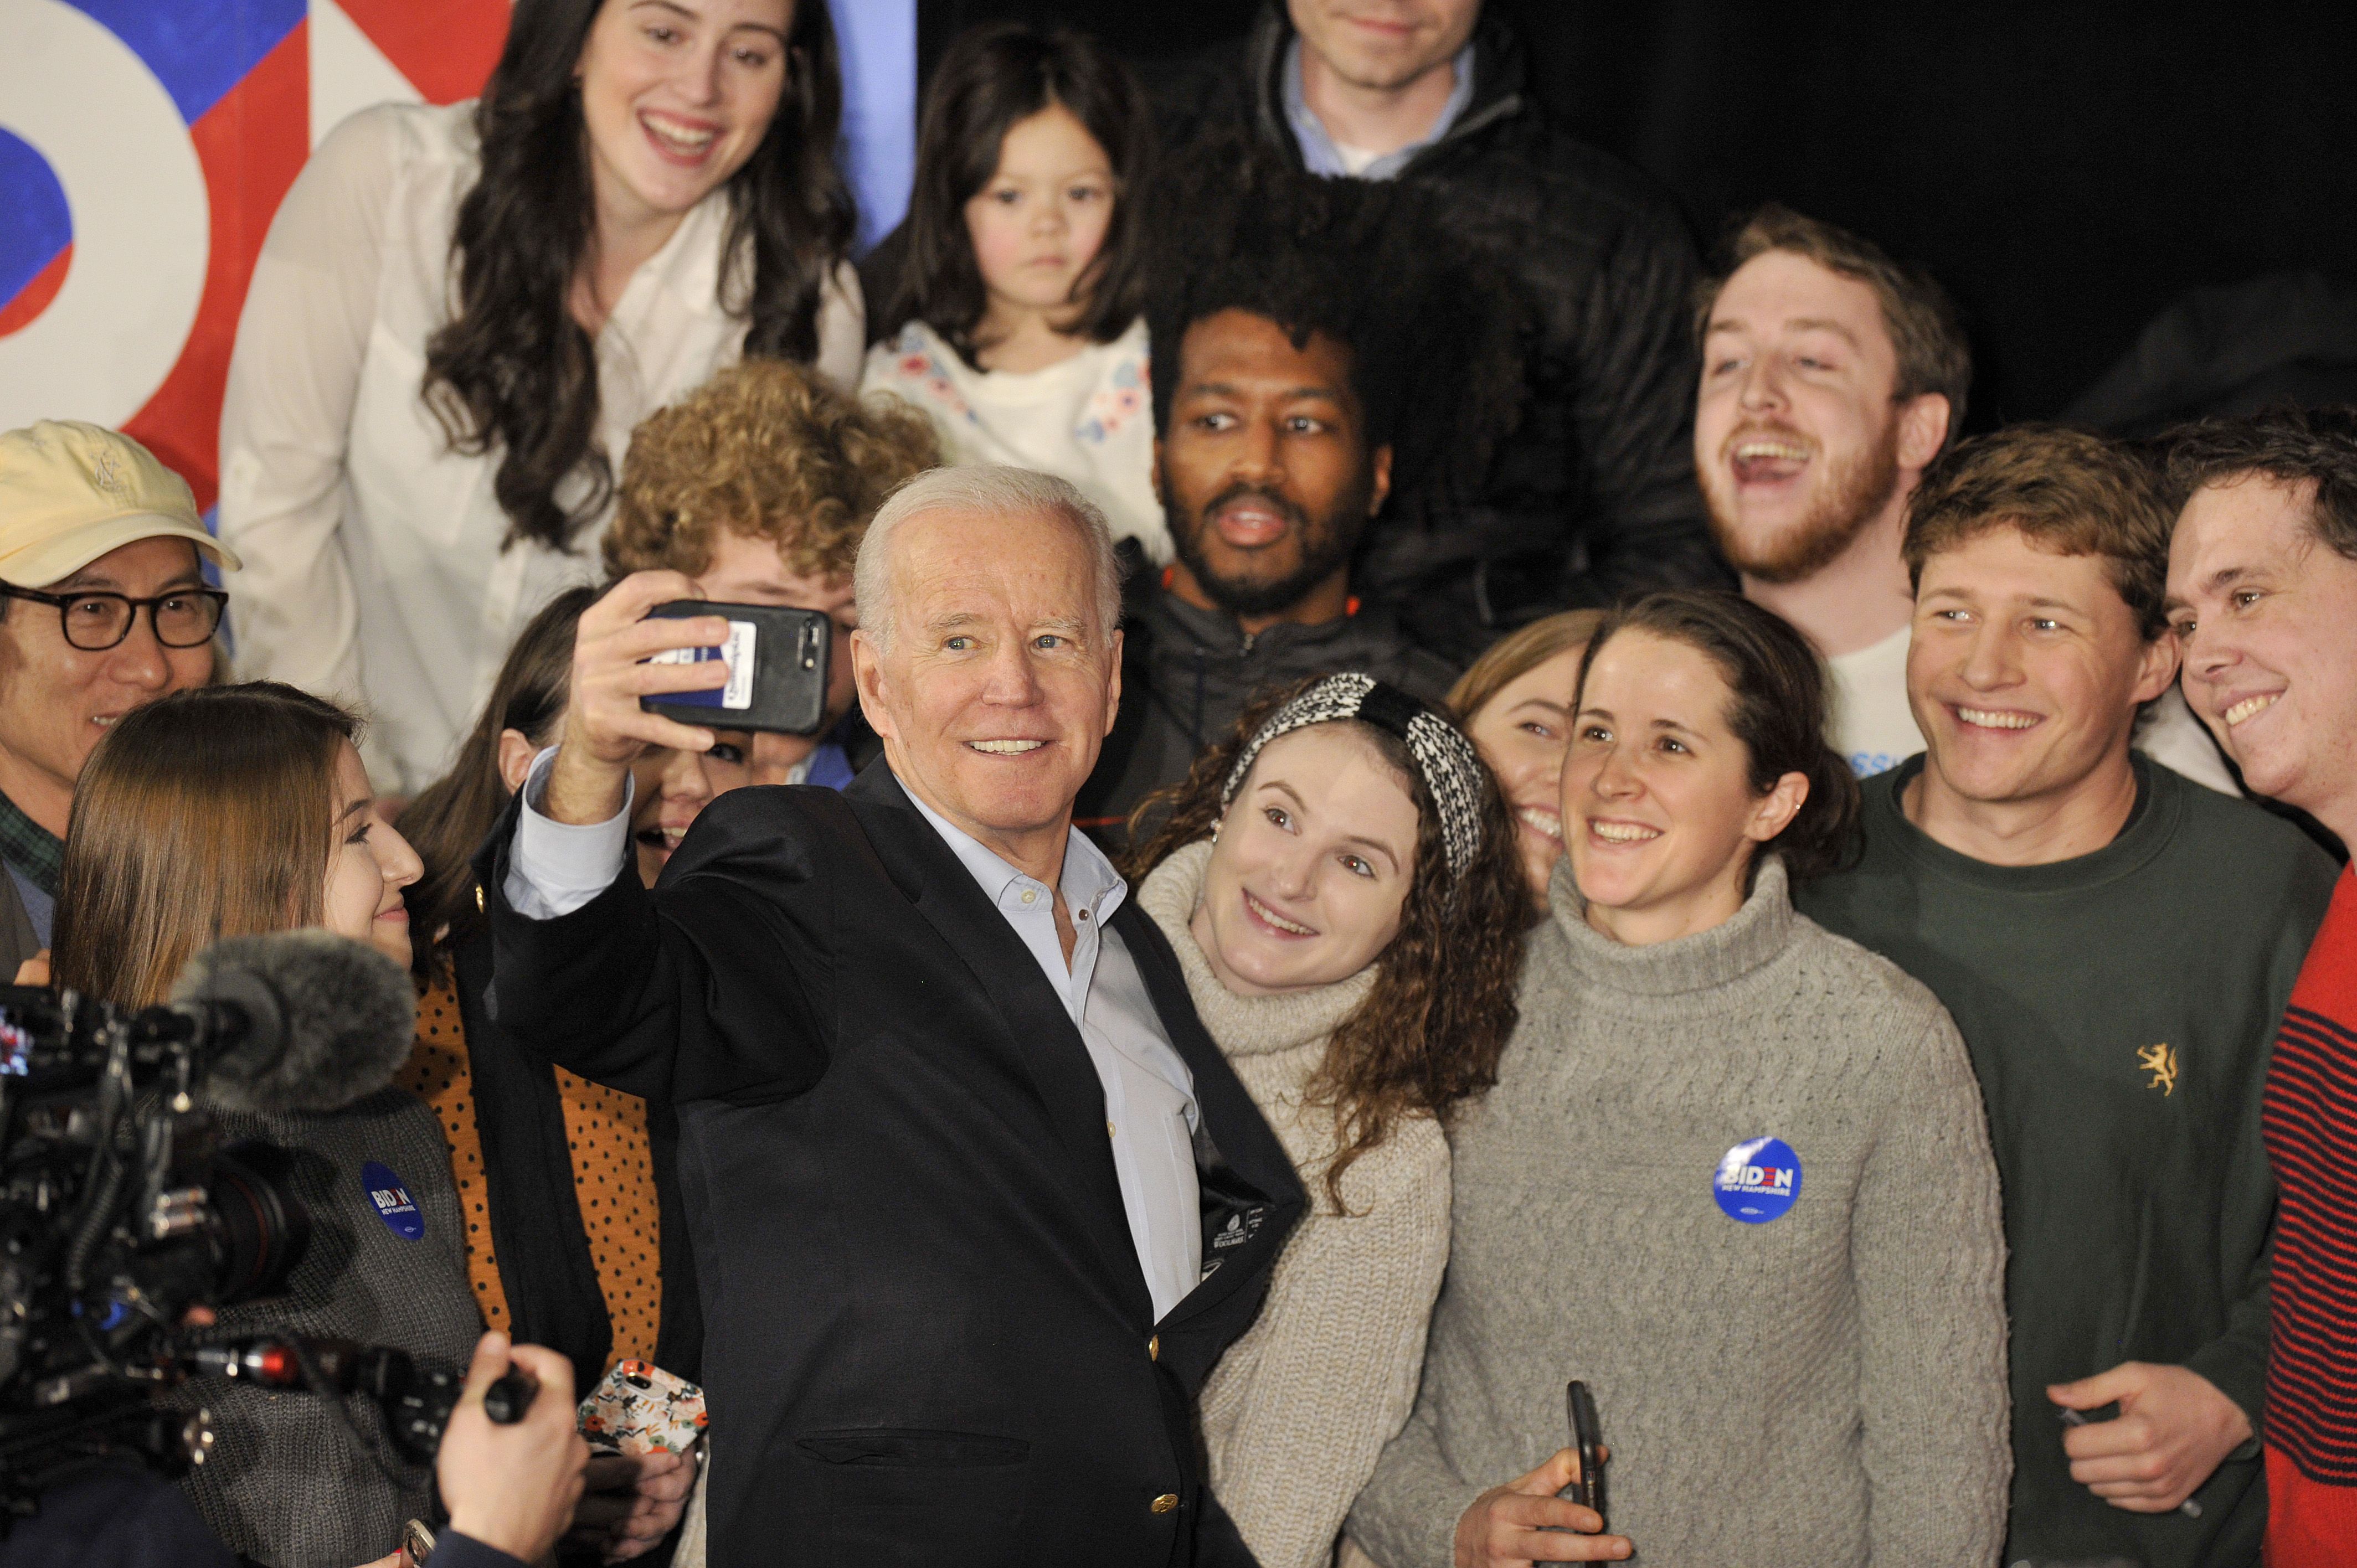 ormer Vice President Joe Biden takes selfies with supporters after speaking at a rally at the Rex Theatre in Manchester, New Hampshire on February 8